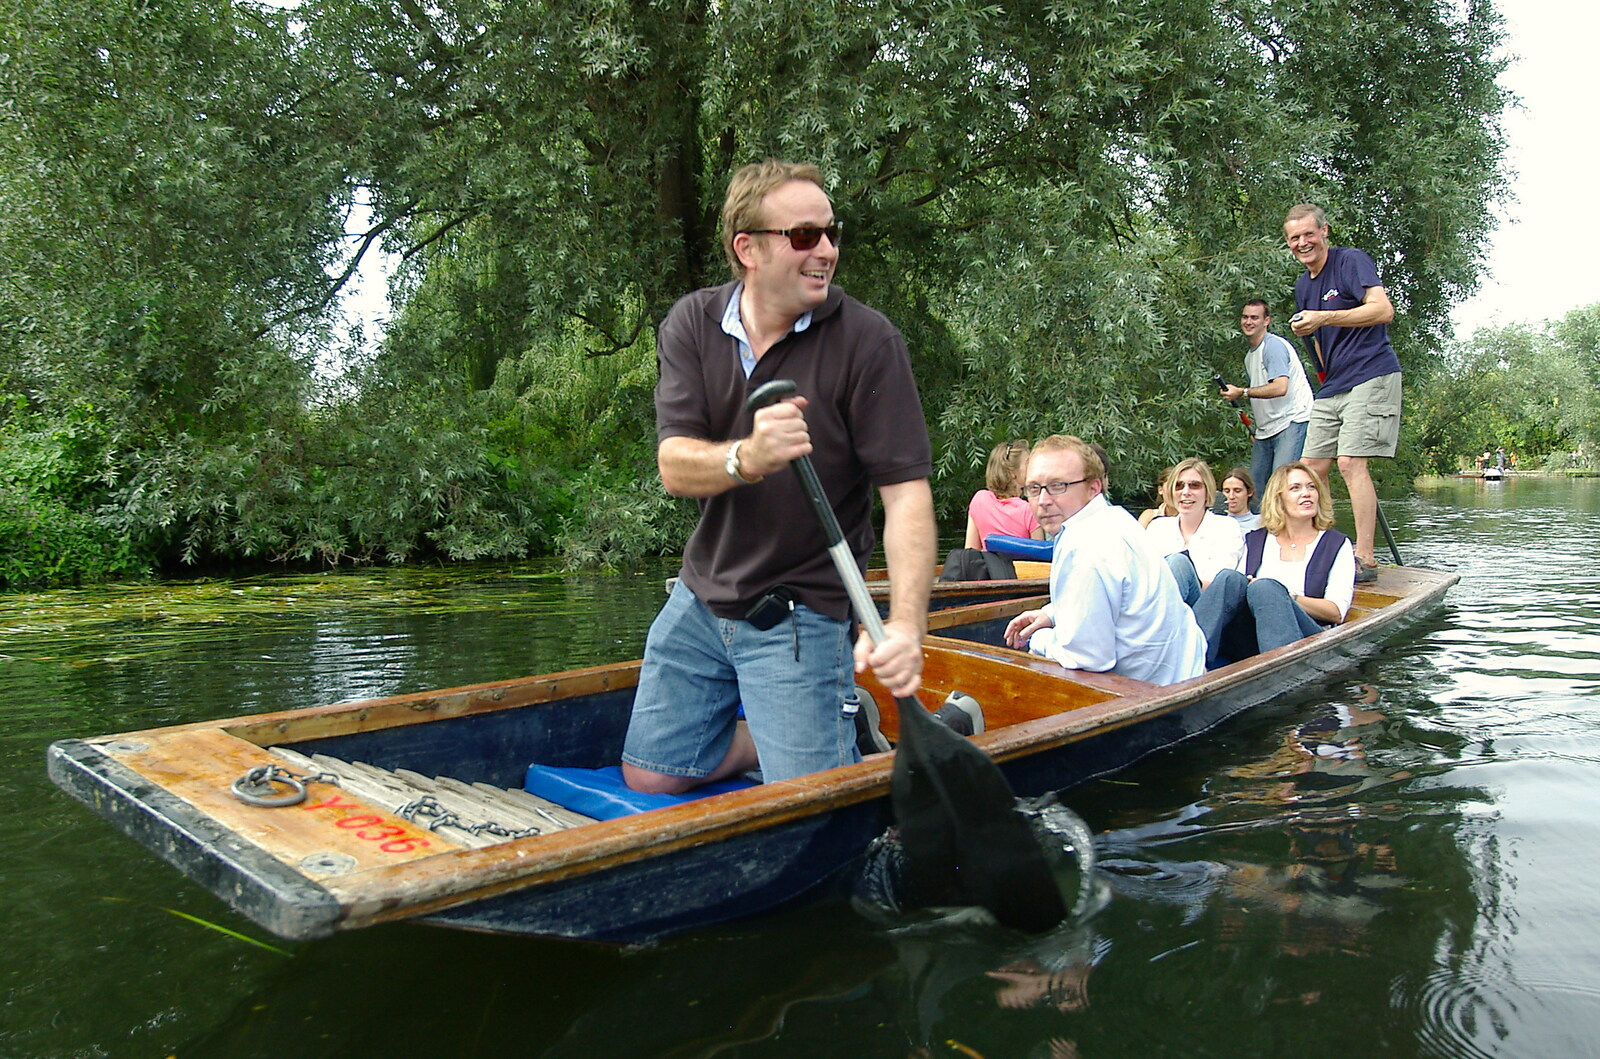 Peter Knowles paddles from Qualcomm goes Punting on the Cam, Grantchester Meadows, Cambridge - 18th August 2005